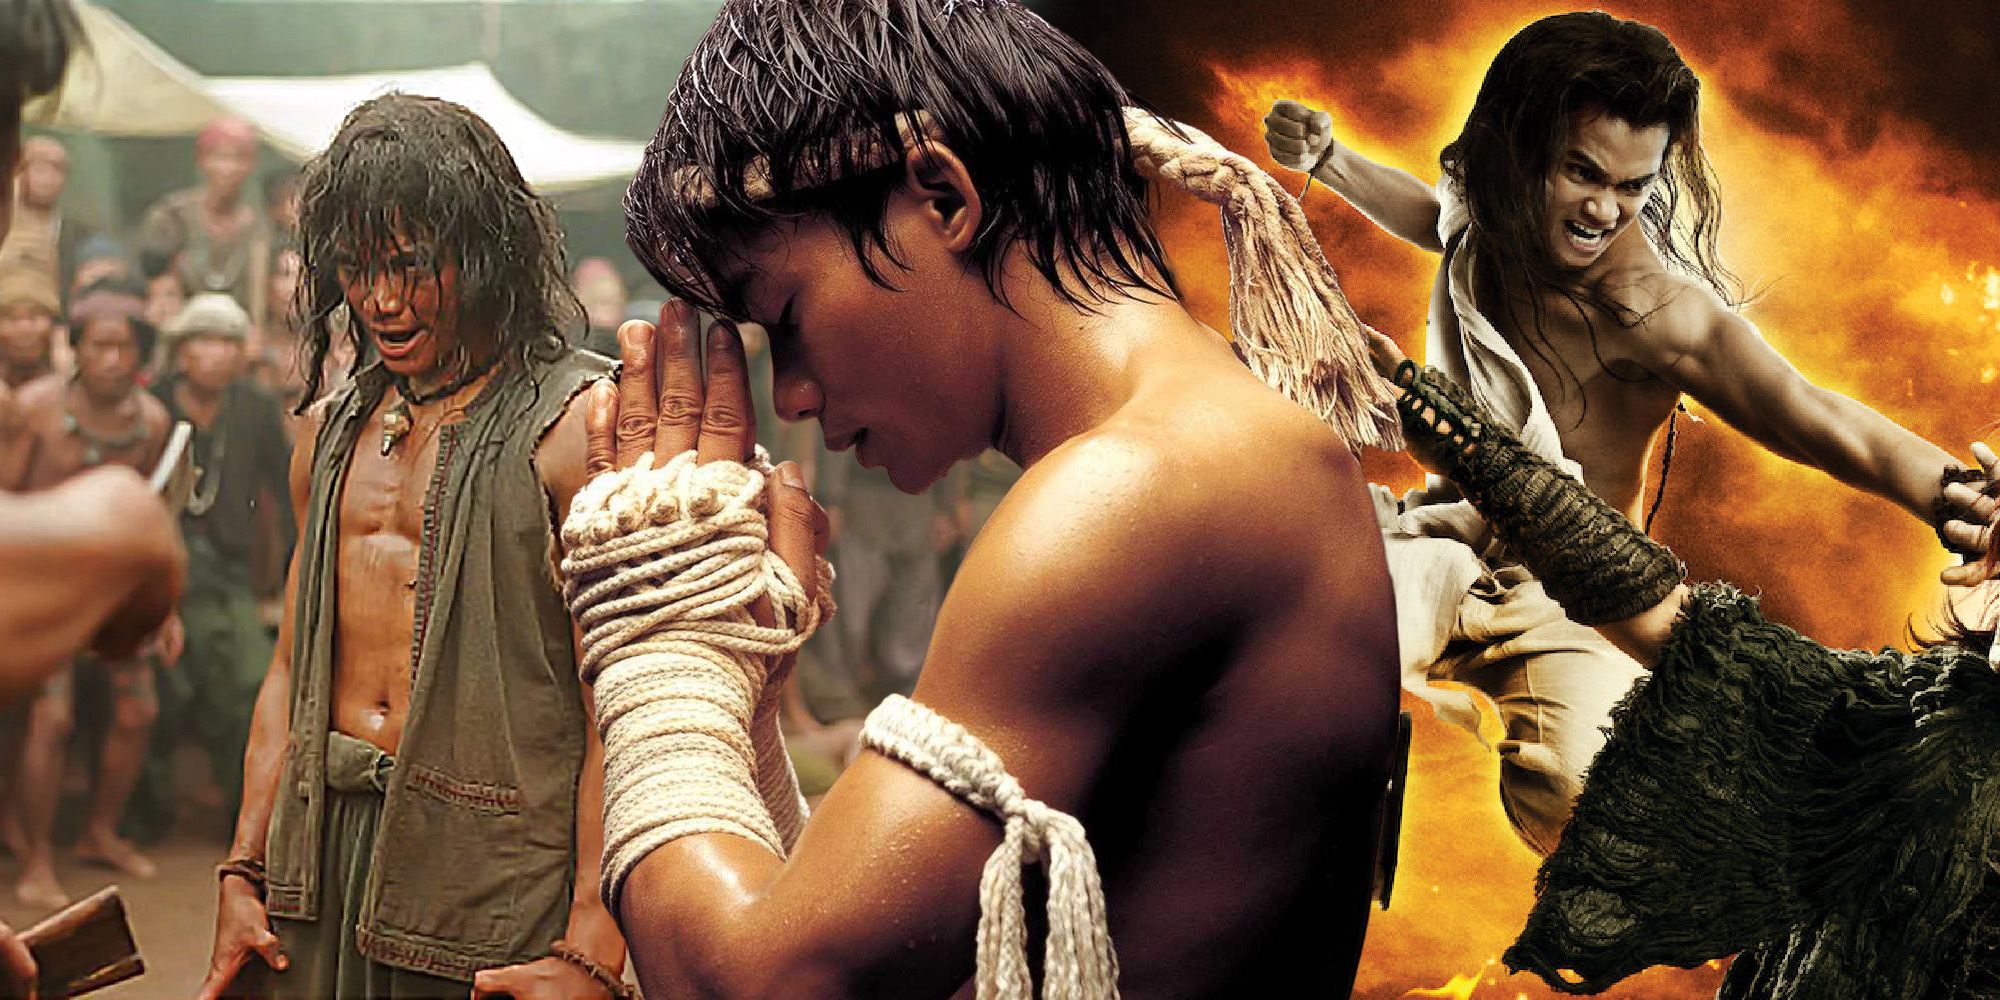 Brutally Action-Packed Trailer for Tony Jaa's Martial Arts Film